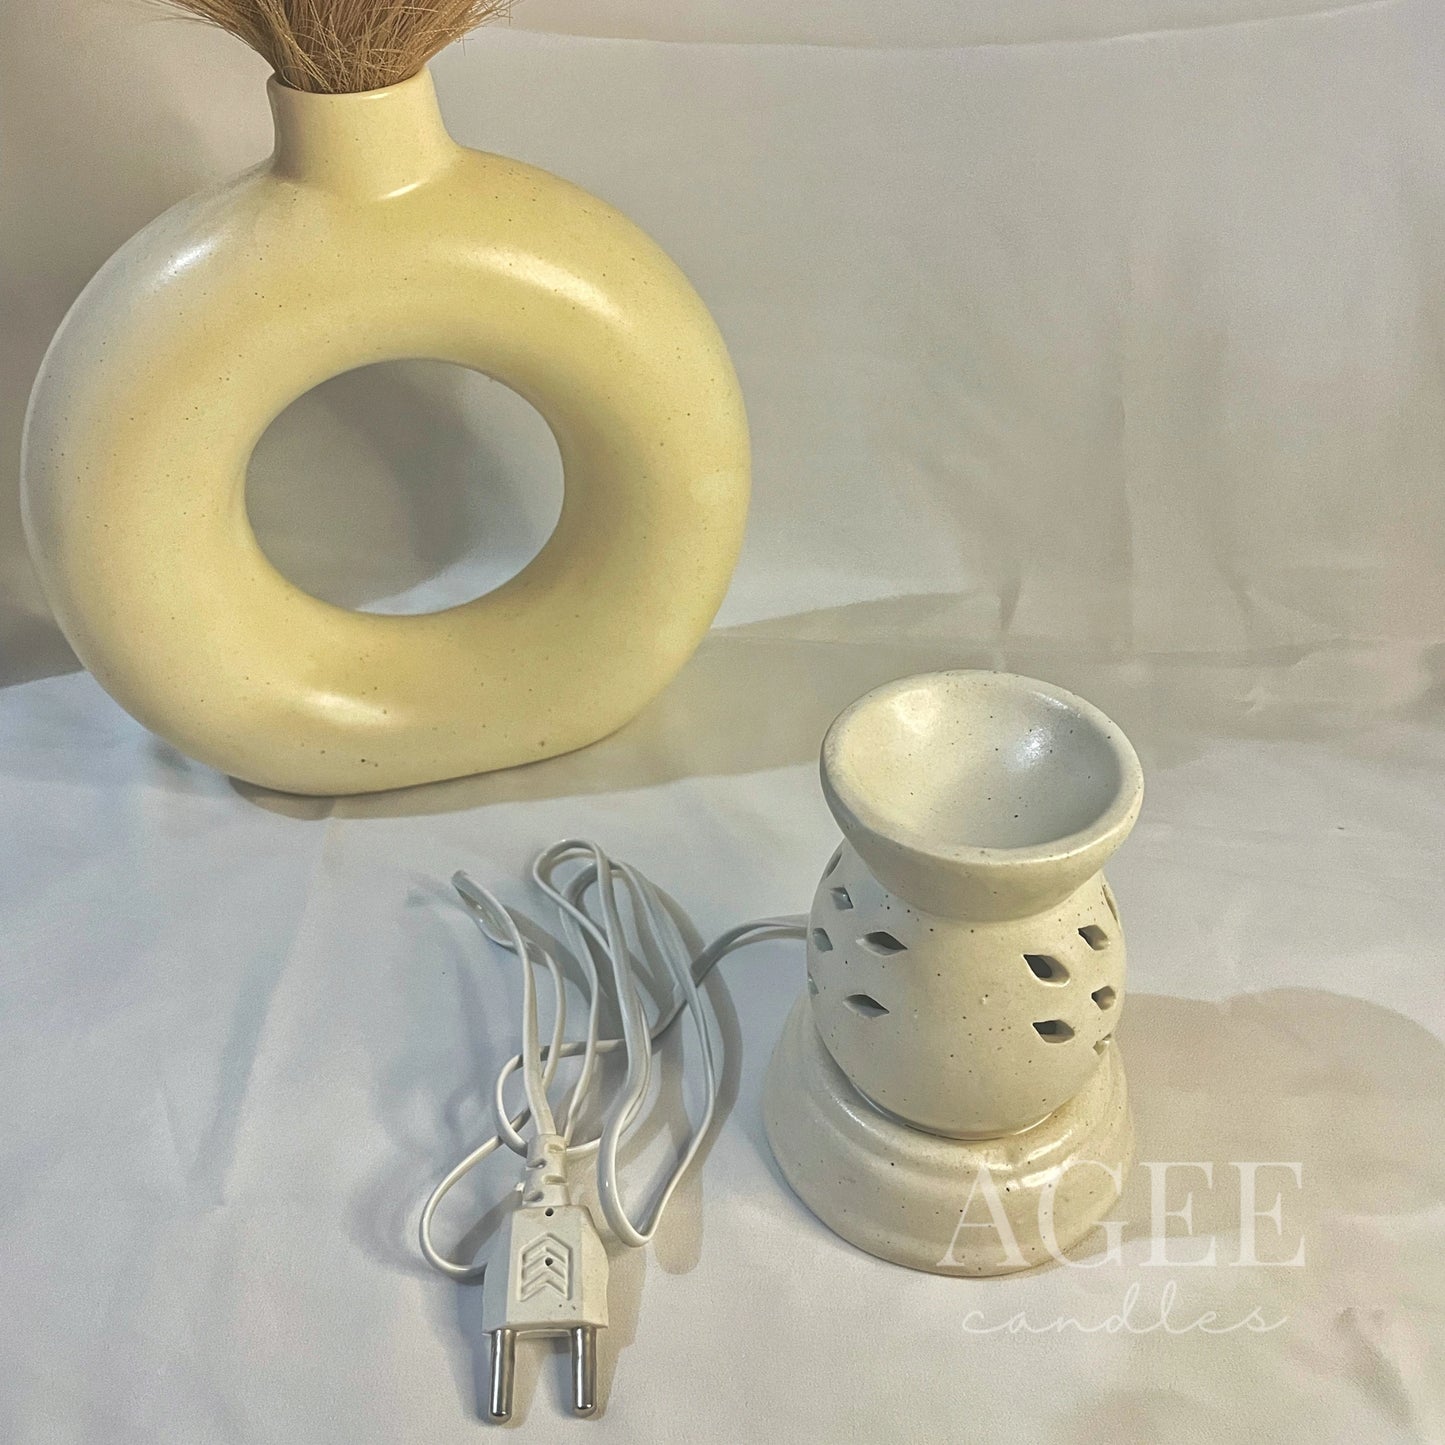 White Matki Shaped Electric Wax Warmer - AGEE Candles